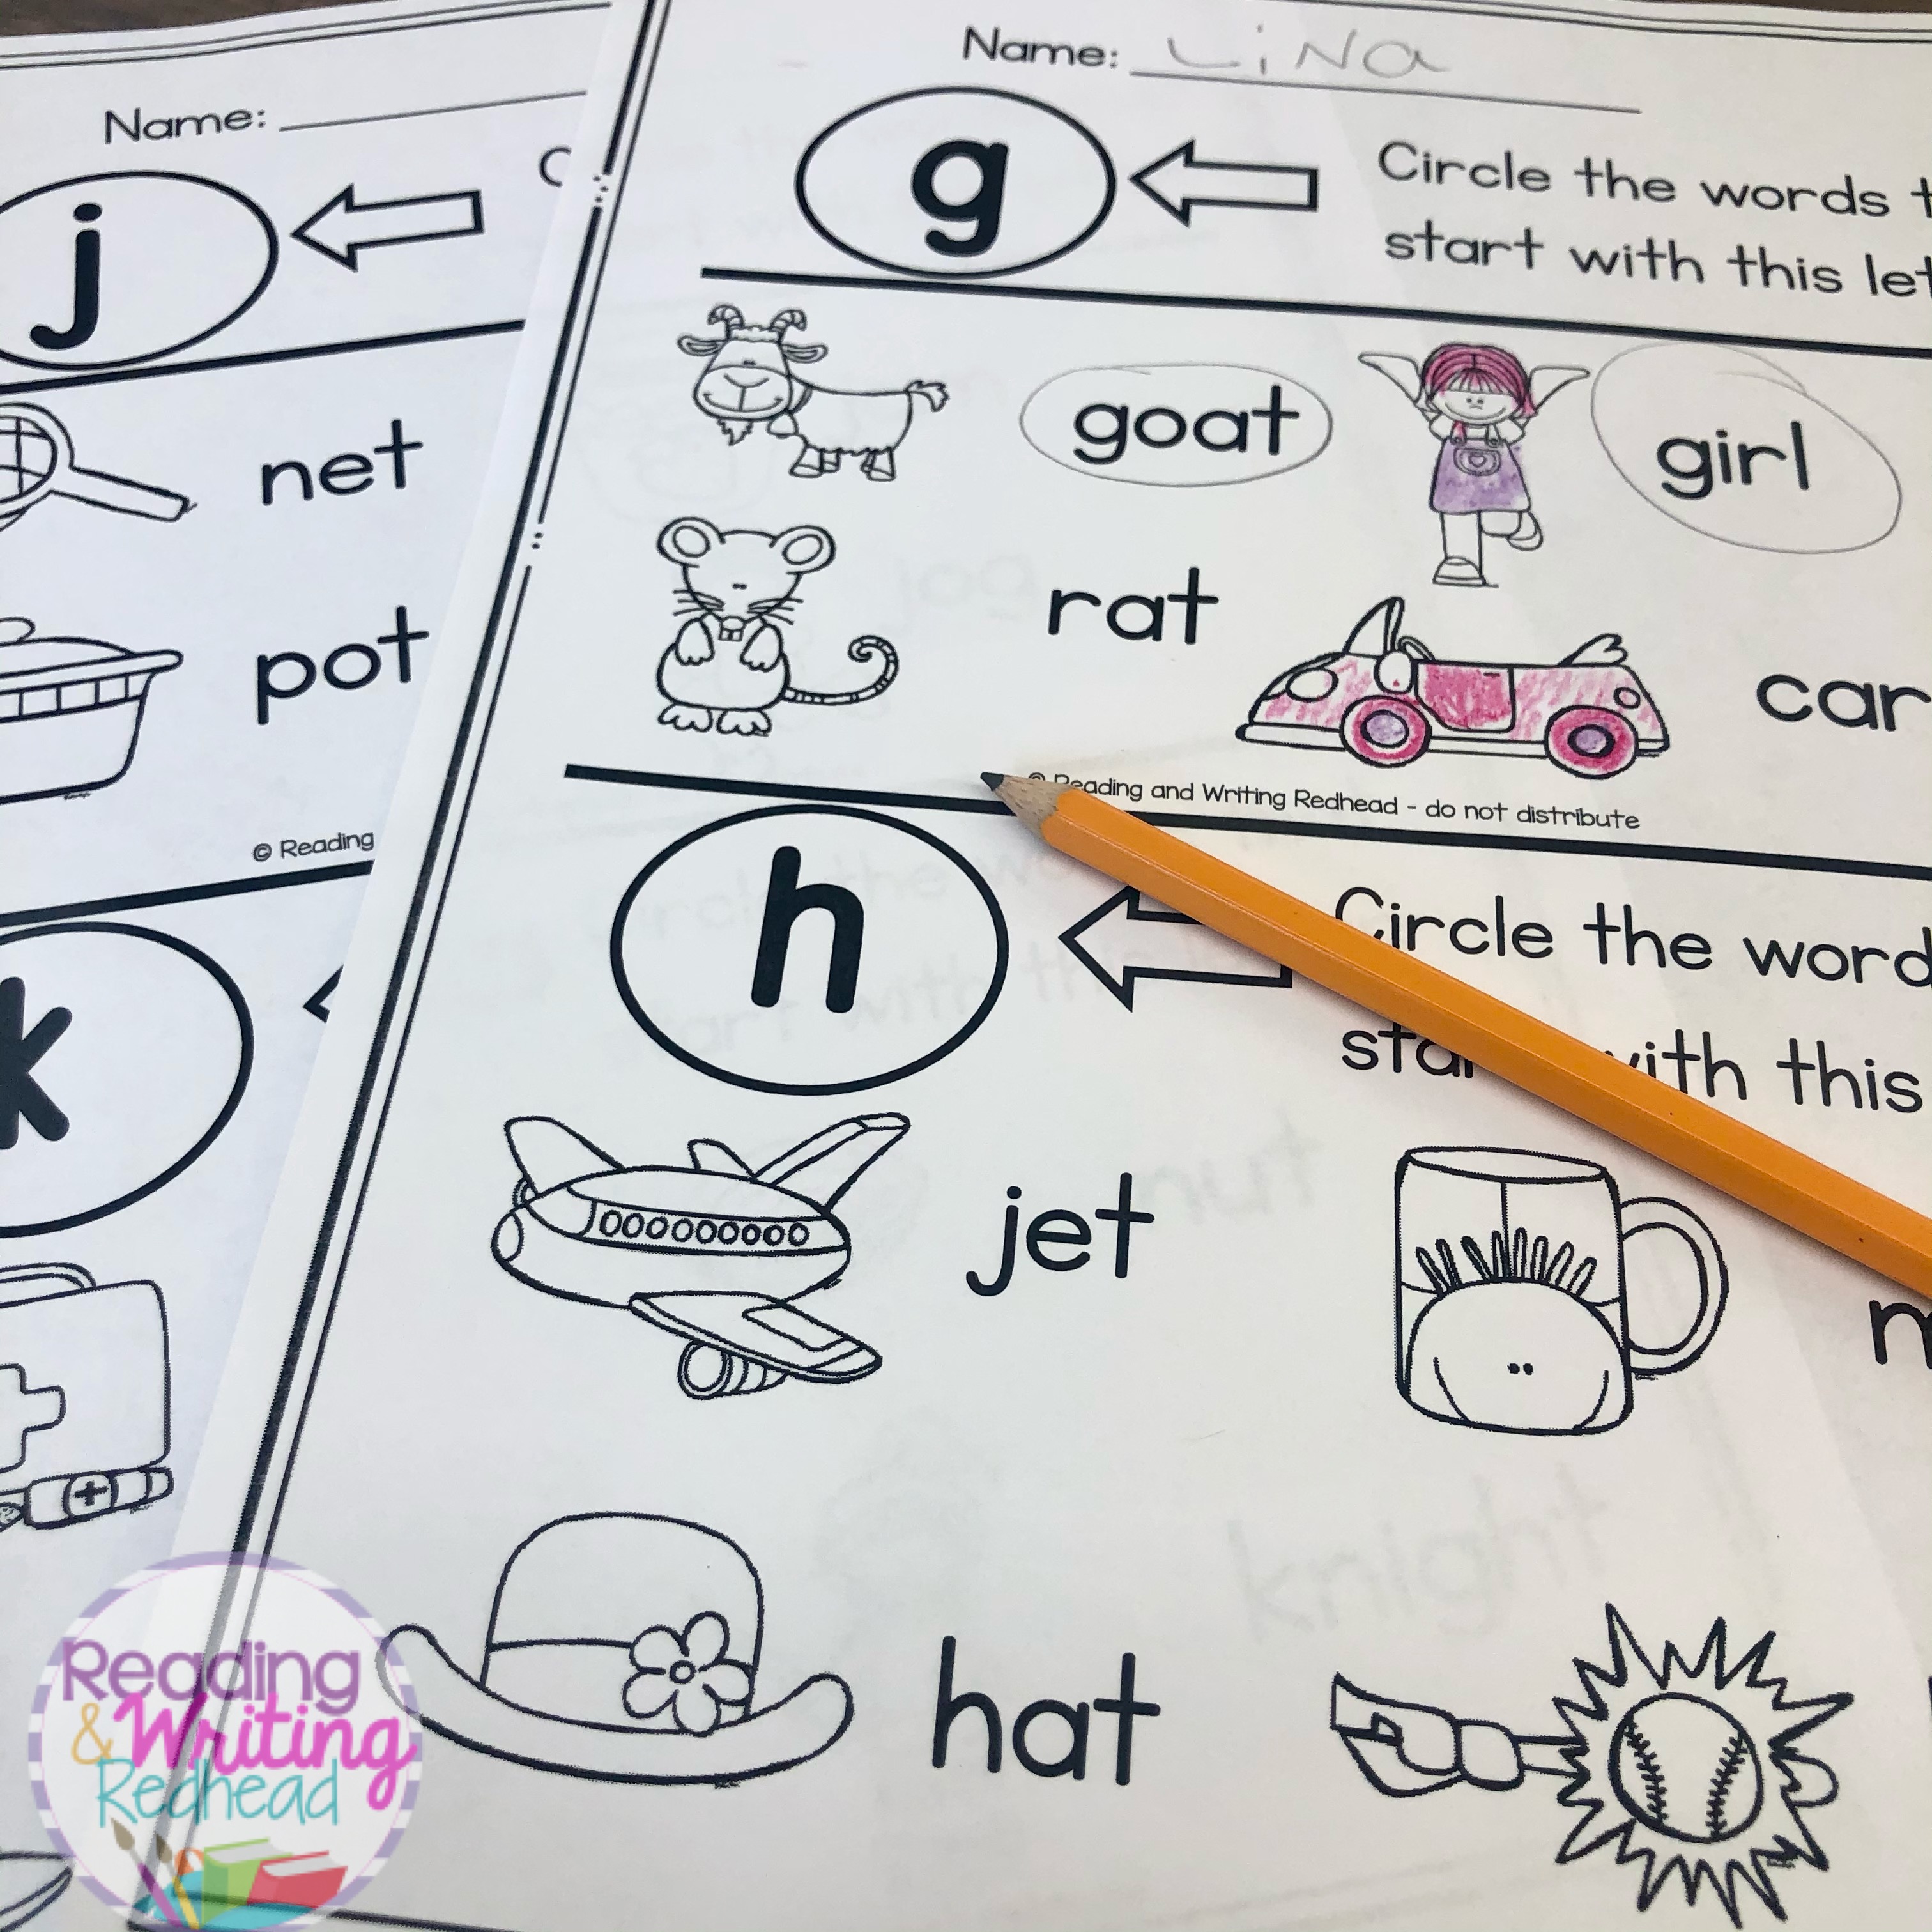 Circle words that start with the same letter